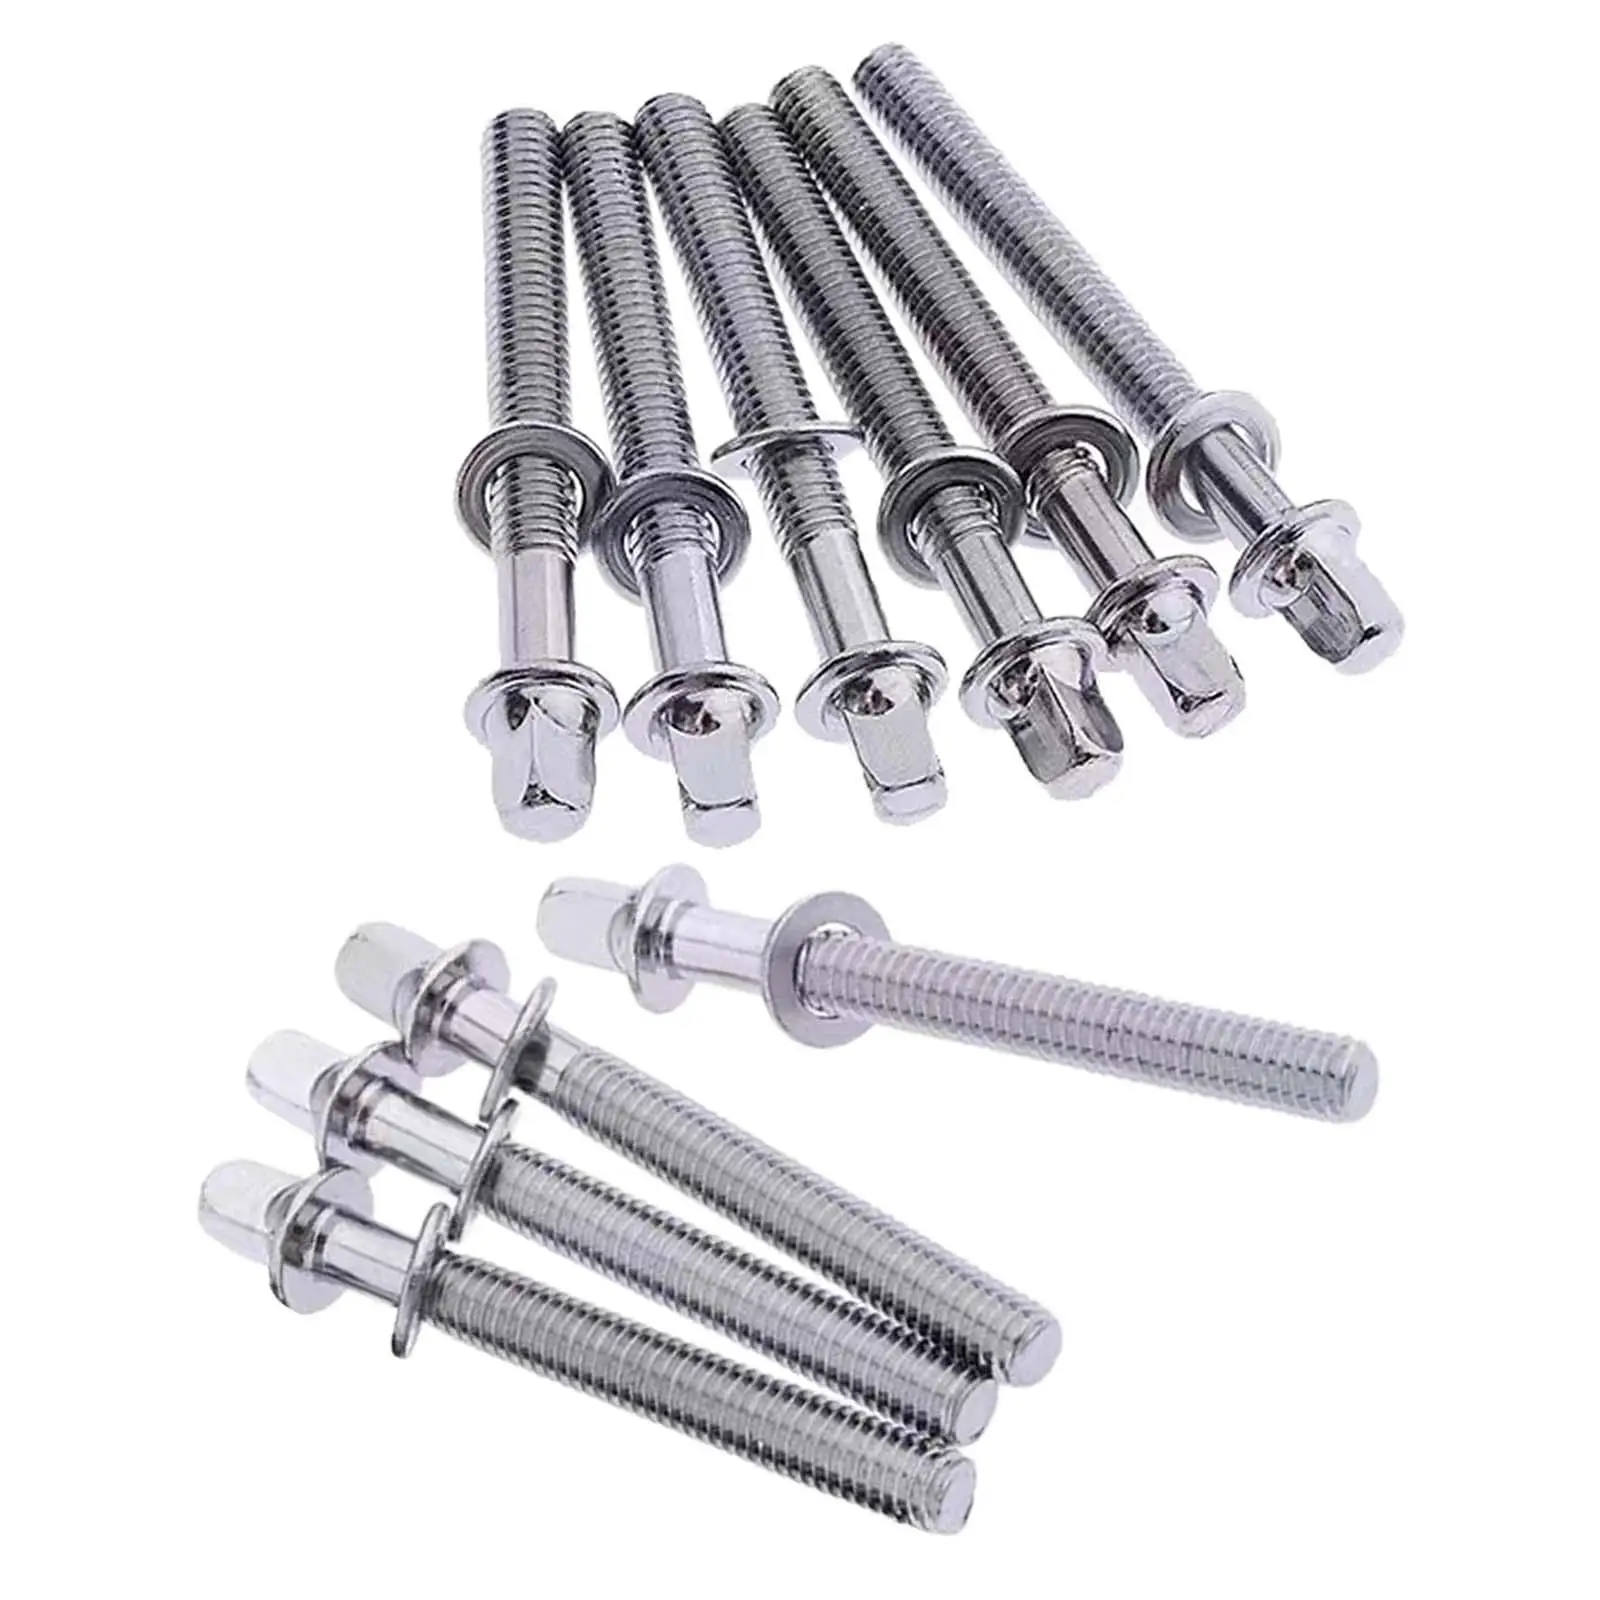 10 Pieces Drum Tight Screw Musical Instrument Accessory Percussion Parts Drums Accessories Universal Mounting Hardware for Drum